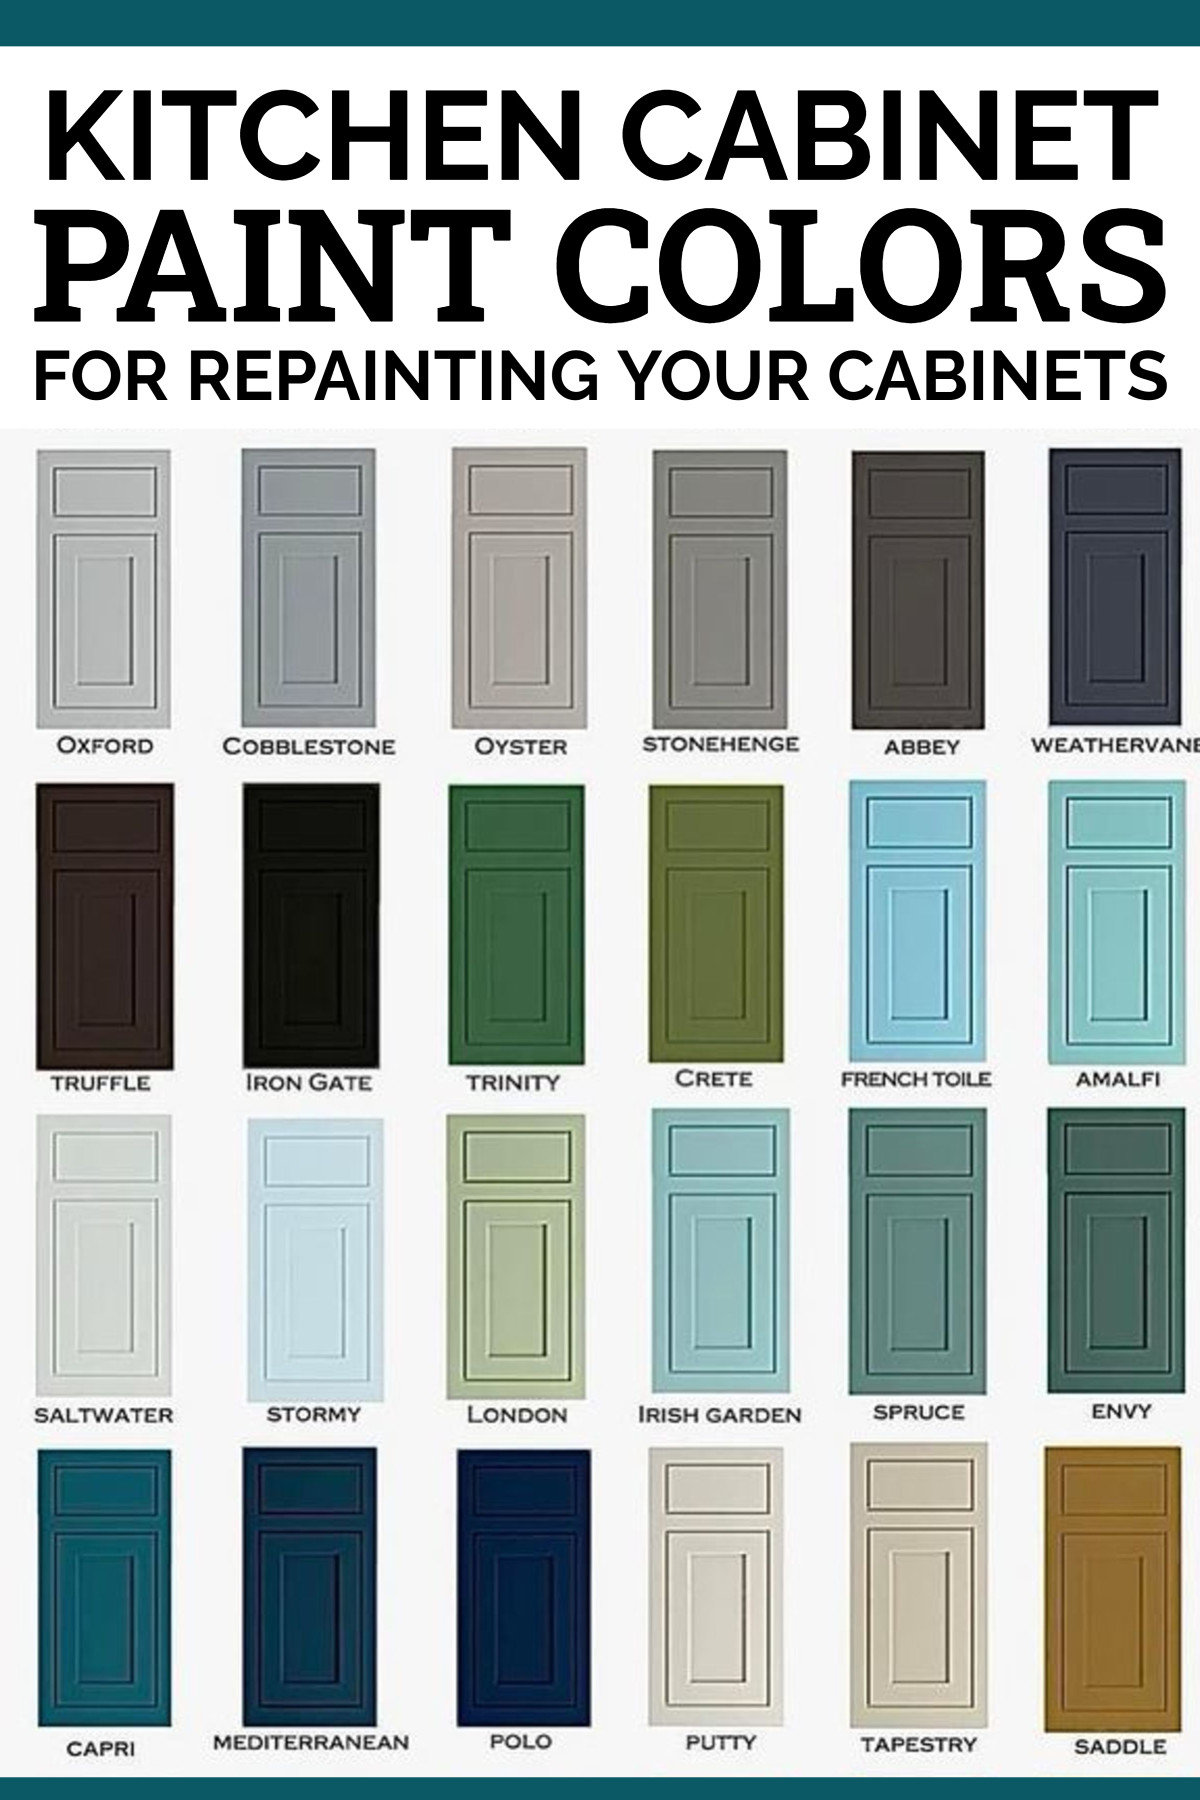 Kitchen cabinet paint colors for repainting your cabinets